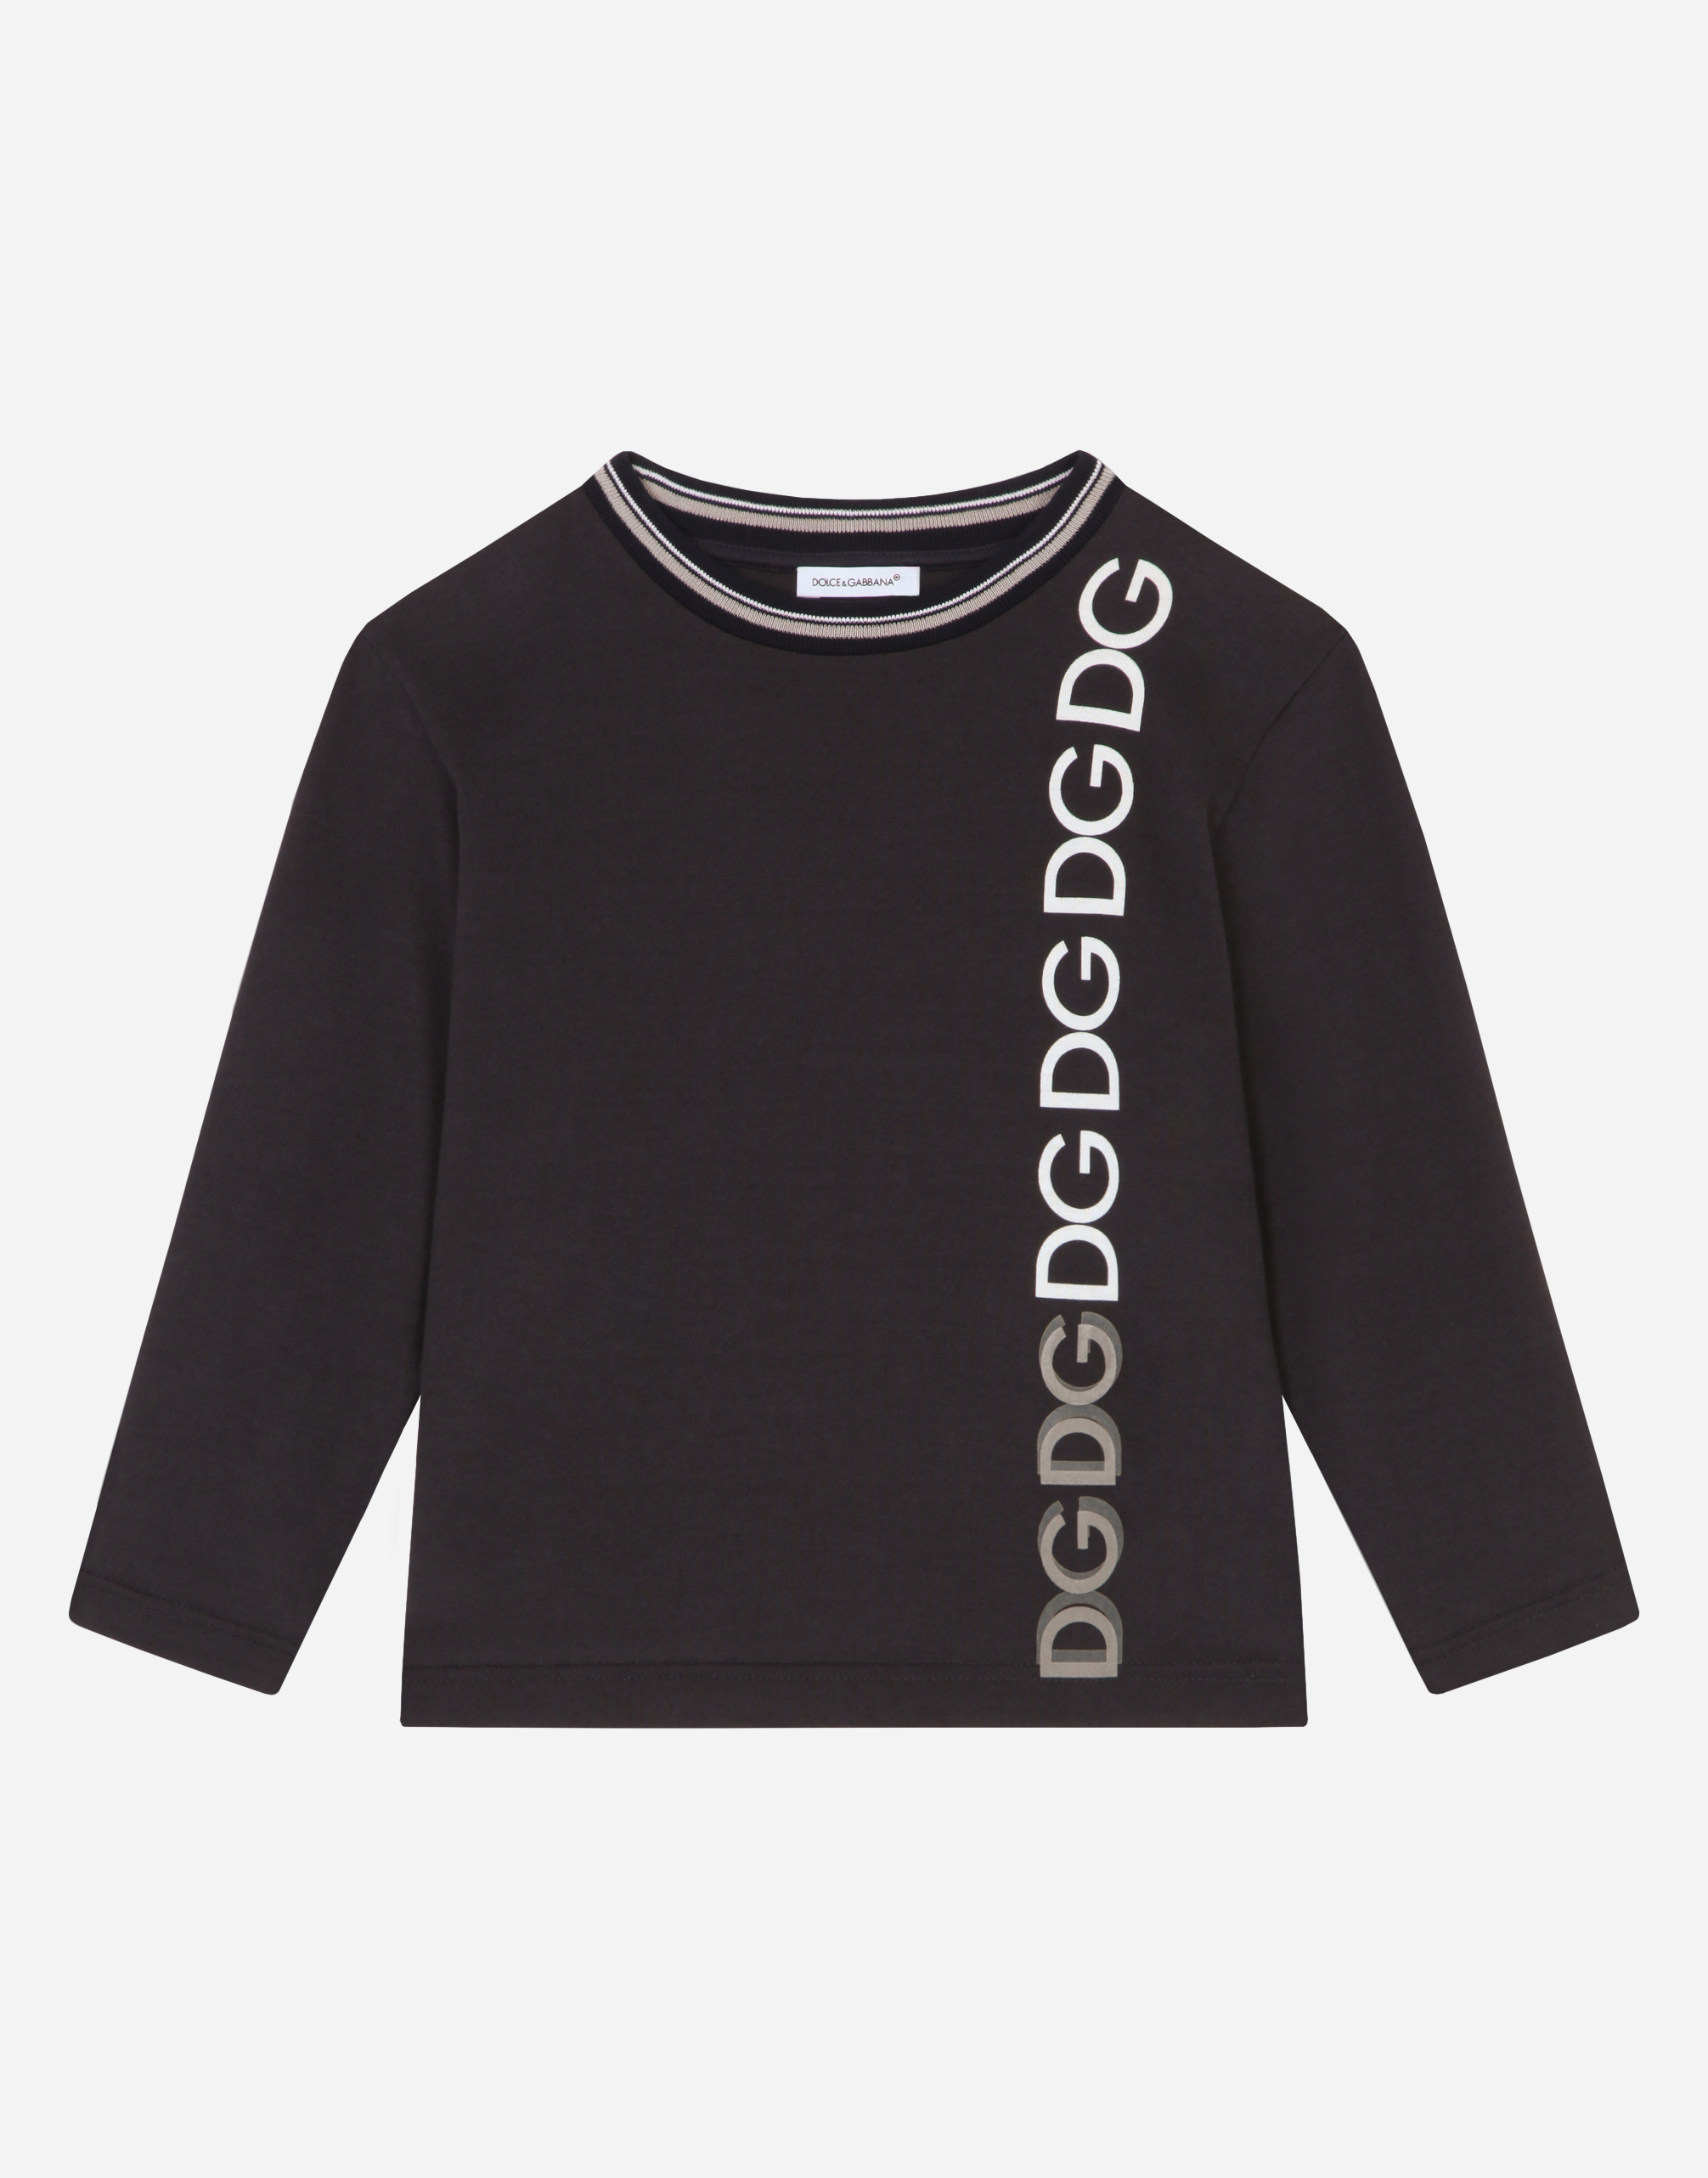 Dolce & Gabbana Kids' Long-sleeved Jersey T-shirt With Dg Print And Flocked Detail